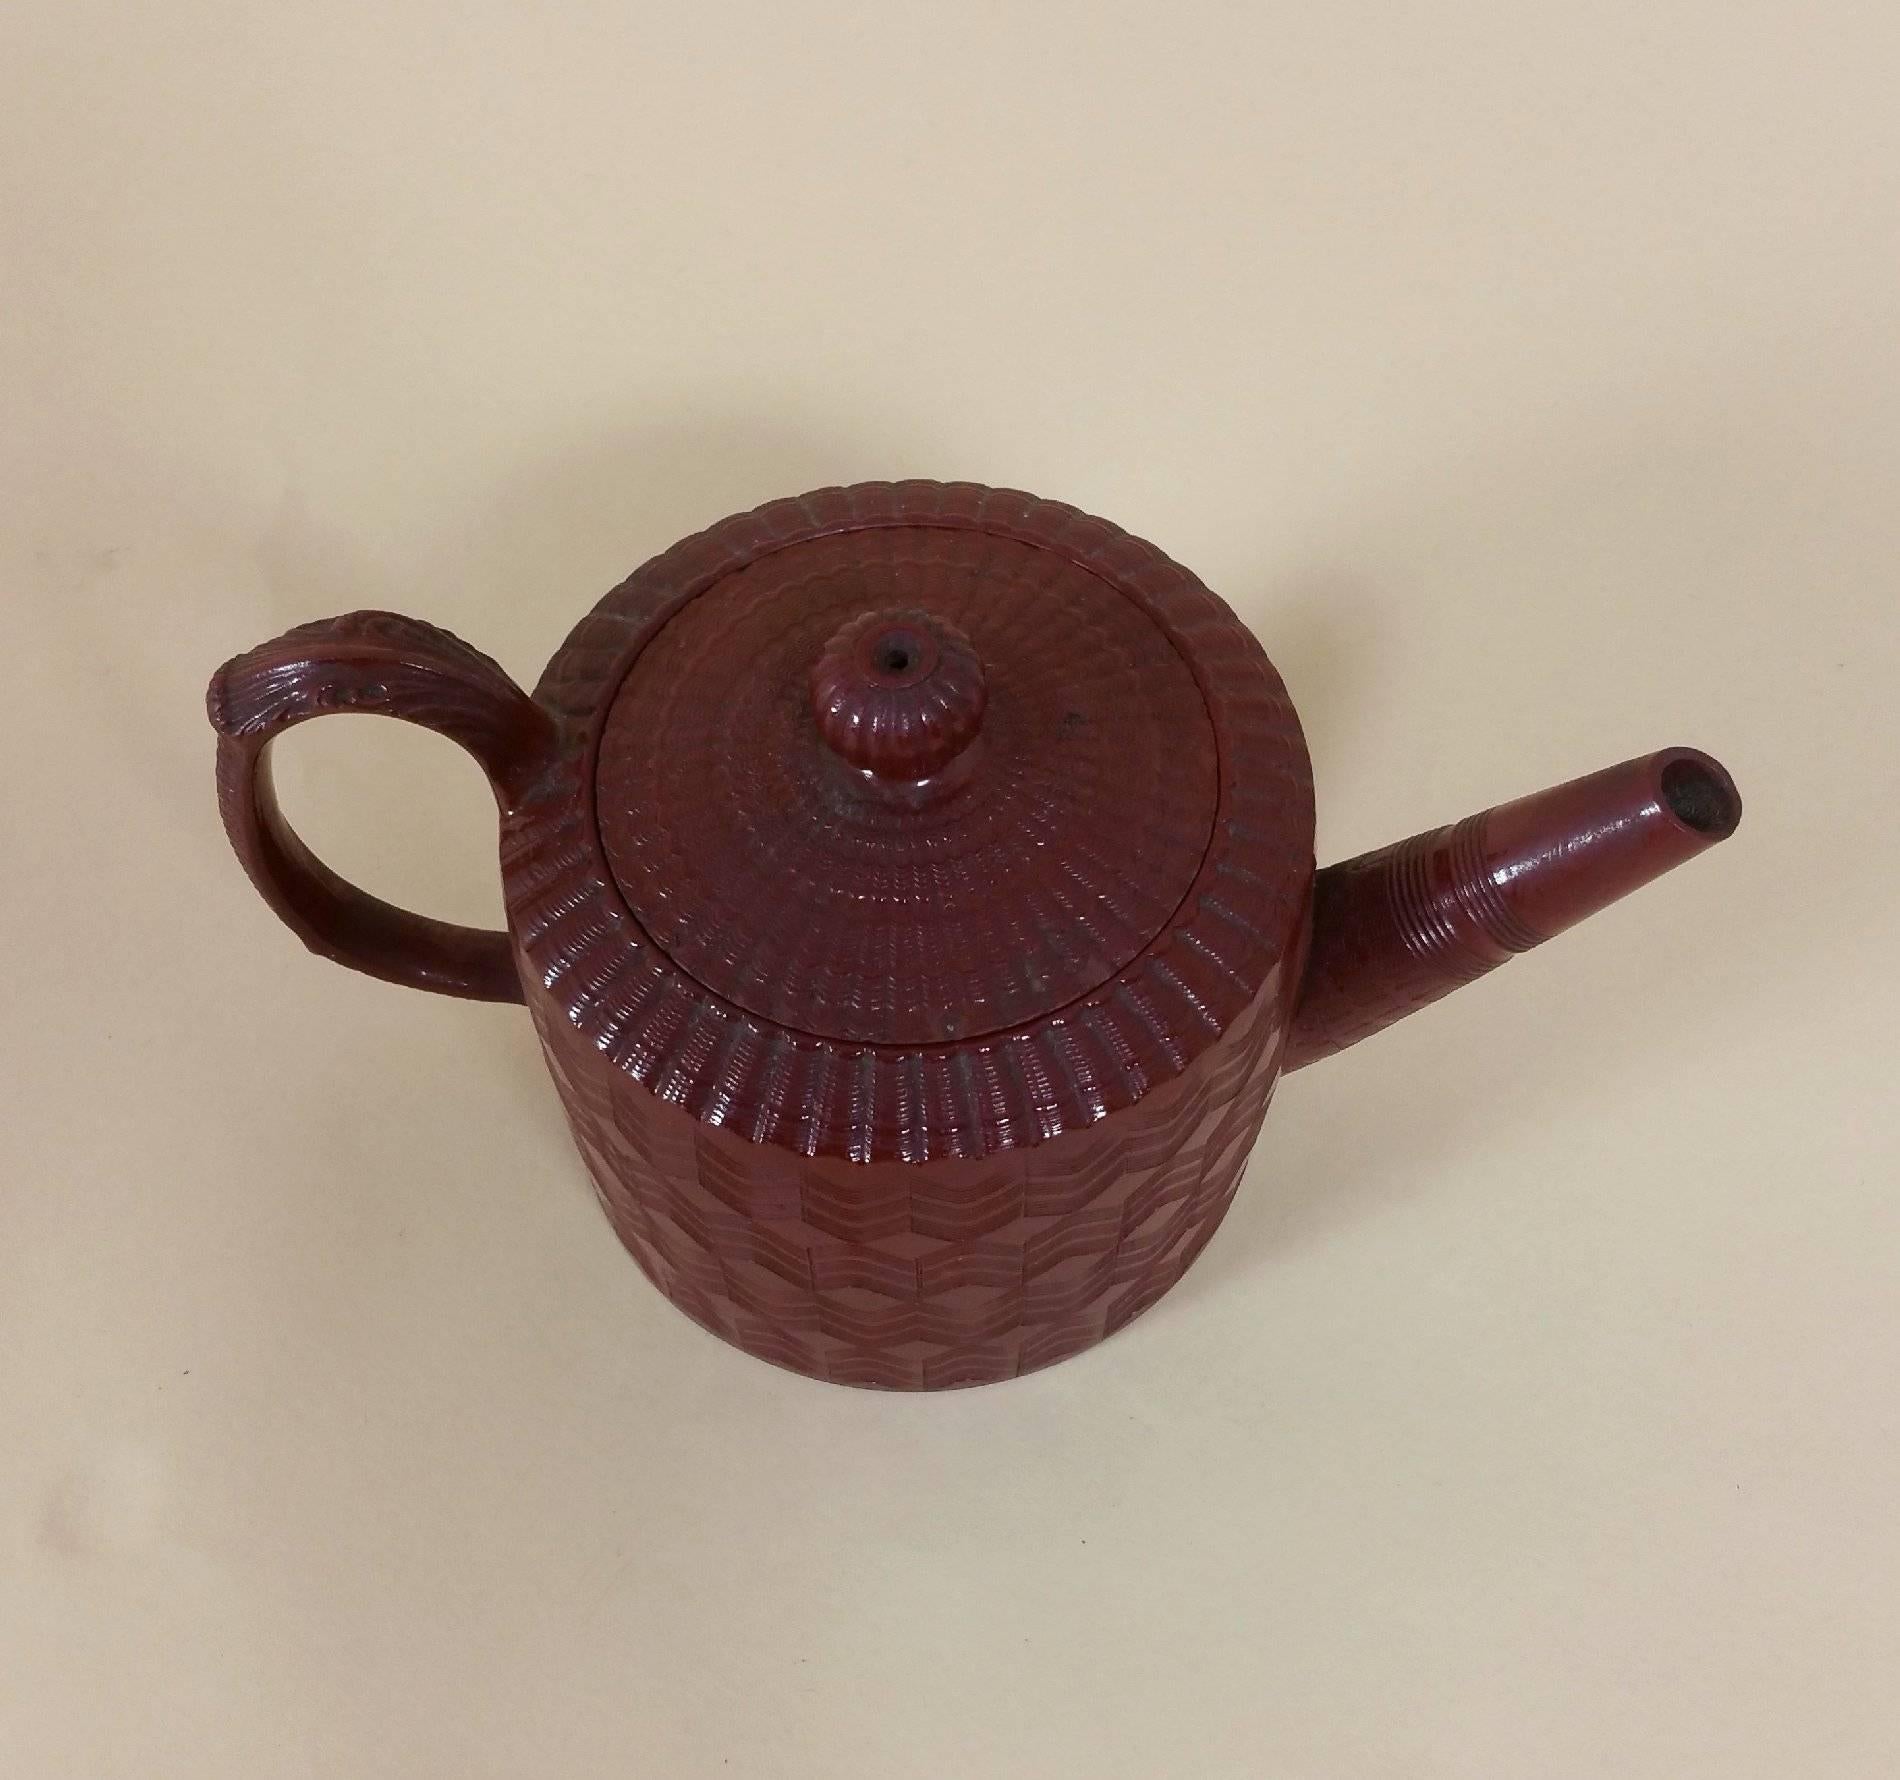 This lovely German pottery teapot is in the manner of Yixing wares, also referred to as purple sand. It features a basket weave and chevron incised decoration, with an impressed seal mark on the base. It measures 3 ¾ in -9.5 cm in diameter and 3 ¾